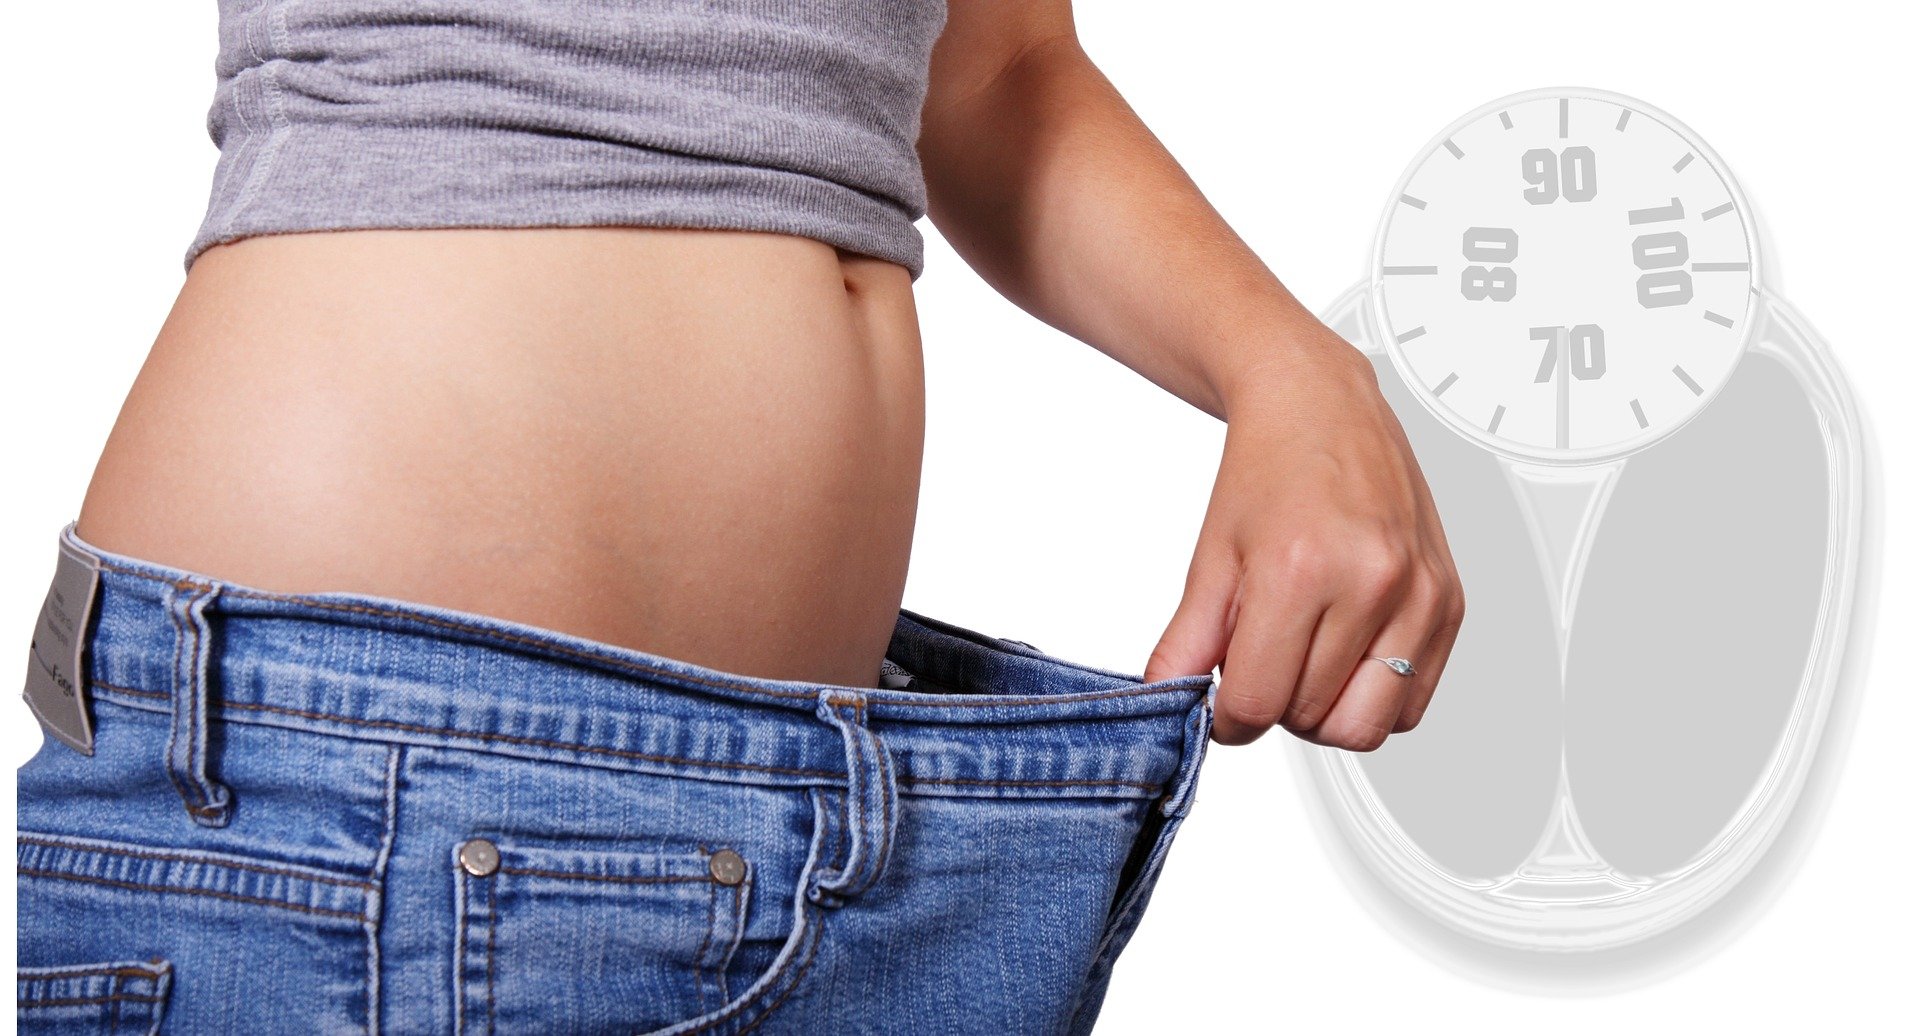 Should Weight Loss Surgery Be Considered as an Option for Reaching Your Health Goals in 2024?